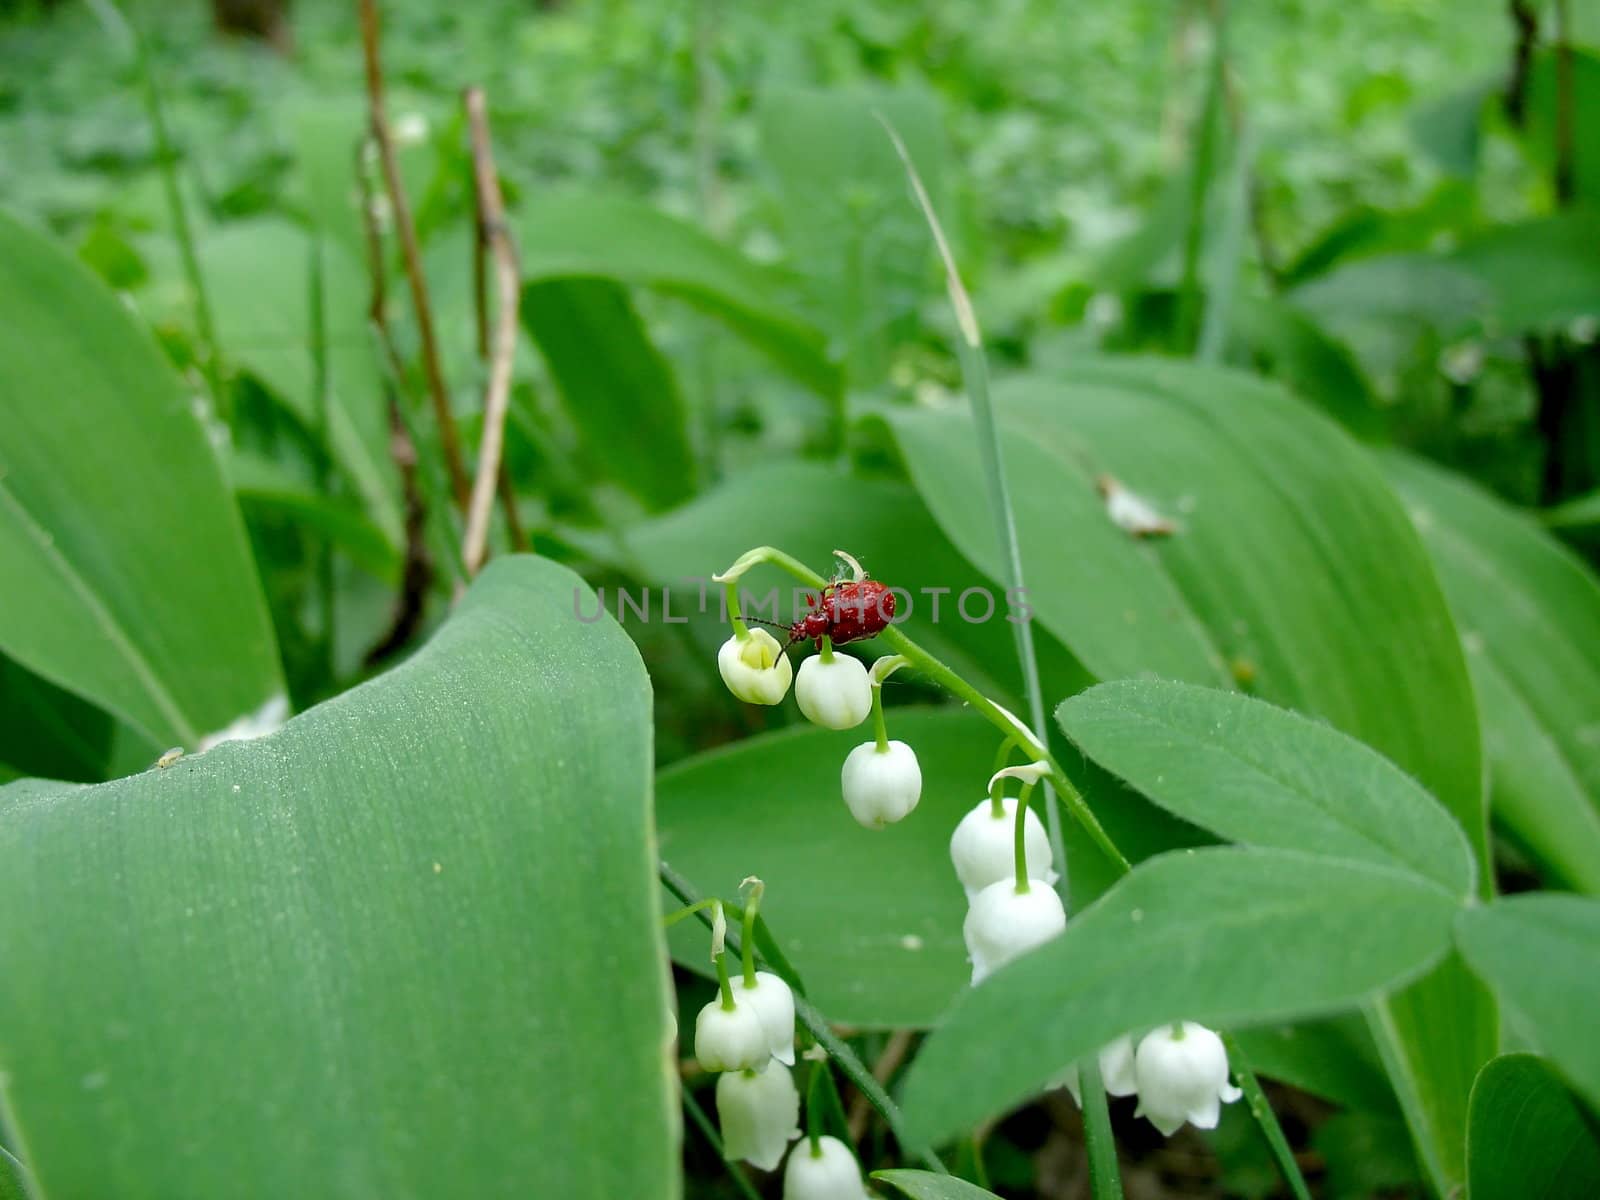 Lily of the valley flowers with bug on them